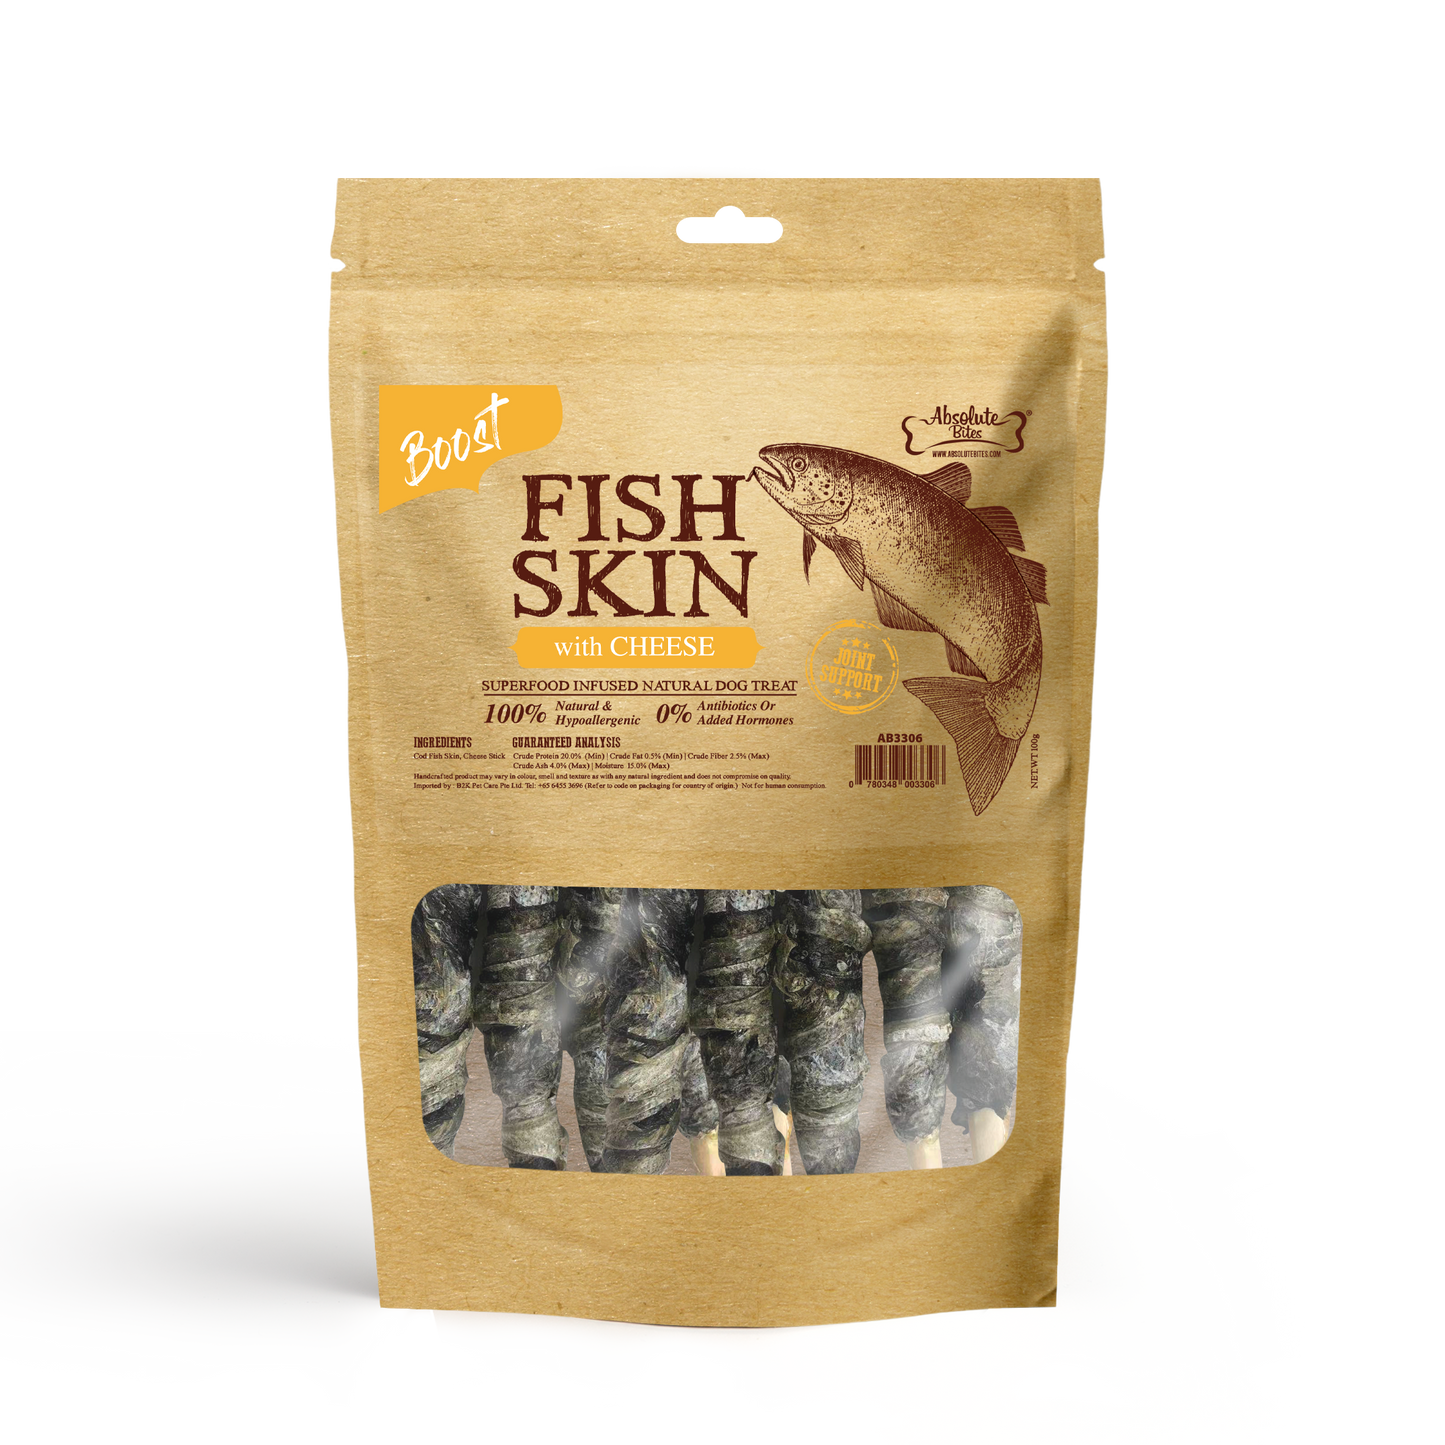 Absolute Bites Air Dried Cod Fish Skin with Cheese Dog Treats (Small Bag) 100g